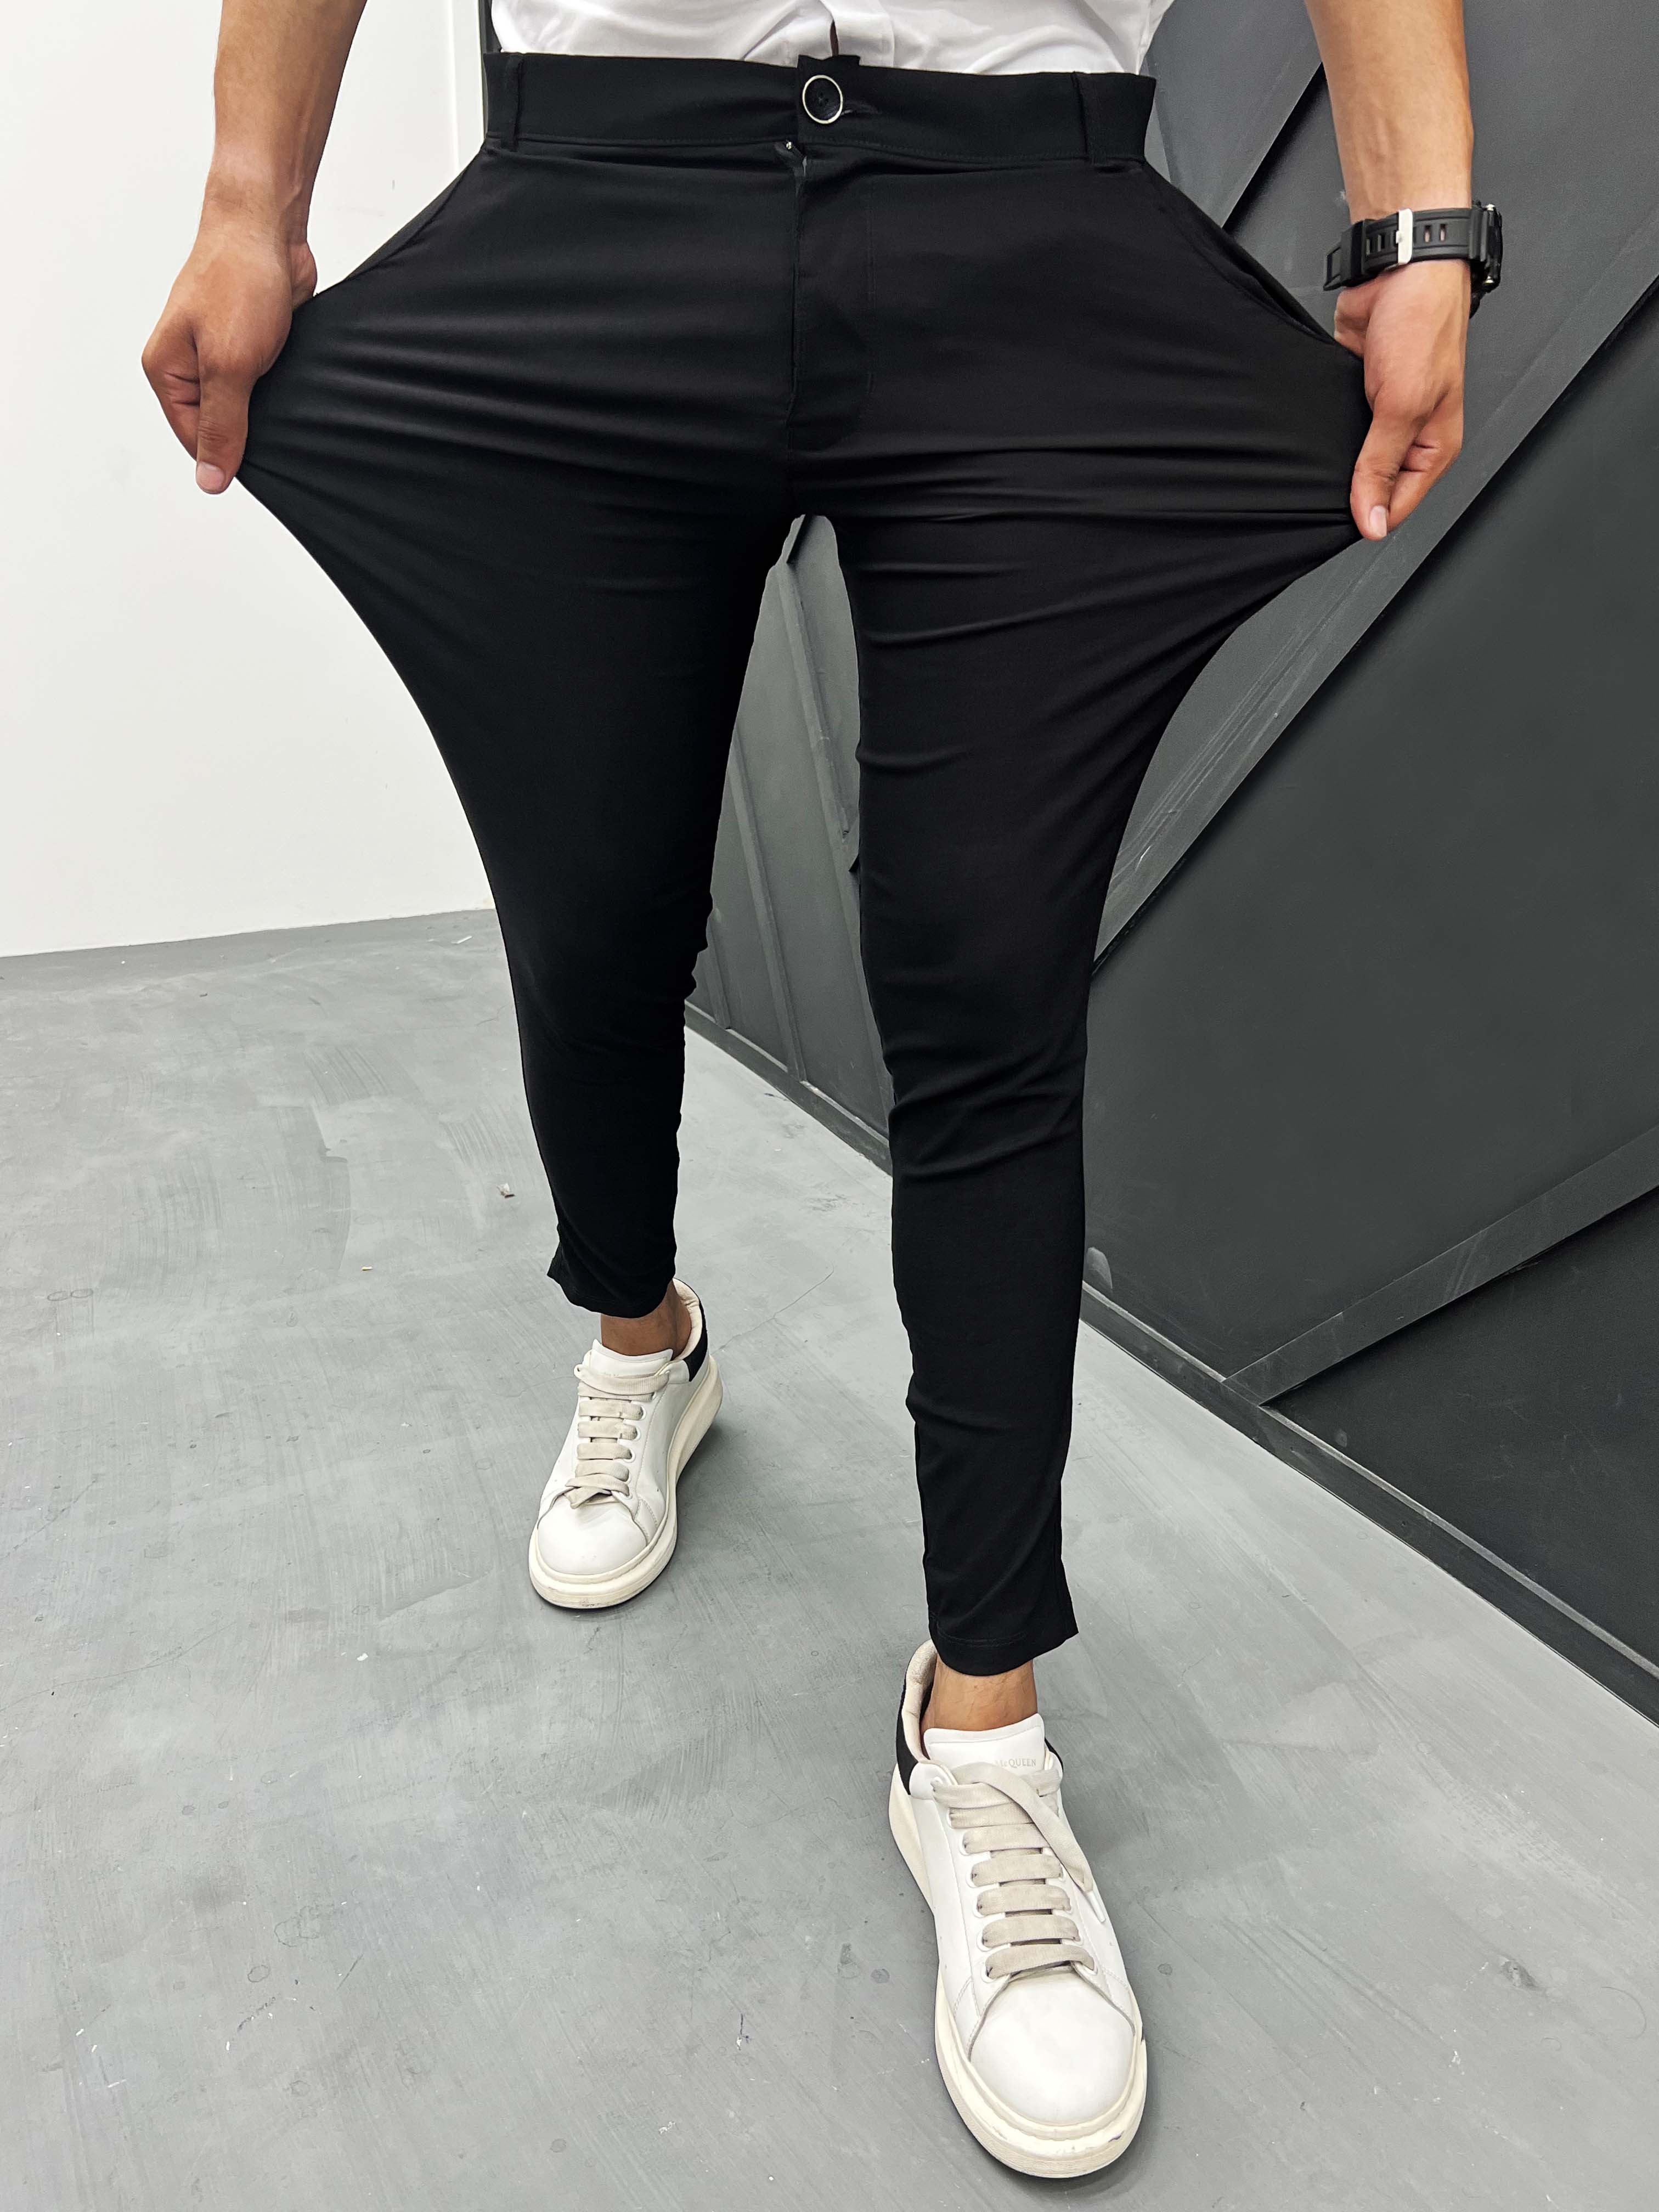 Men Supper Elastic Stretchable Cotton Pant In Black